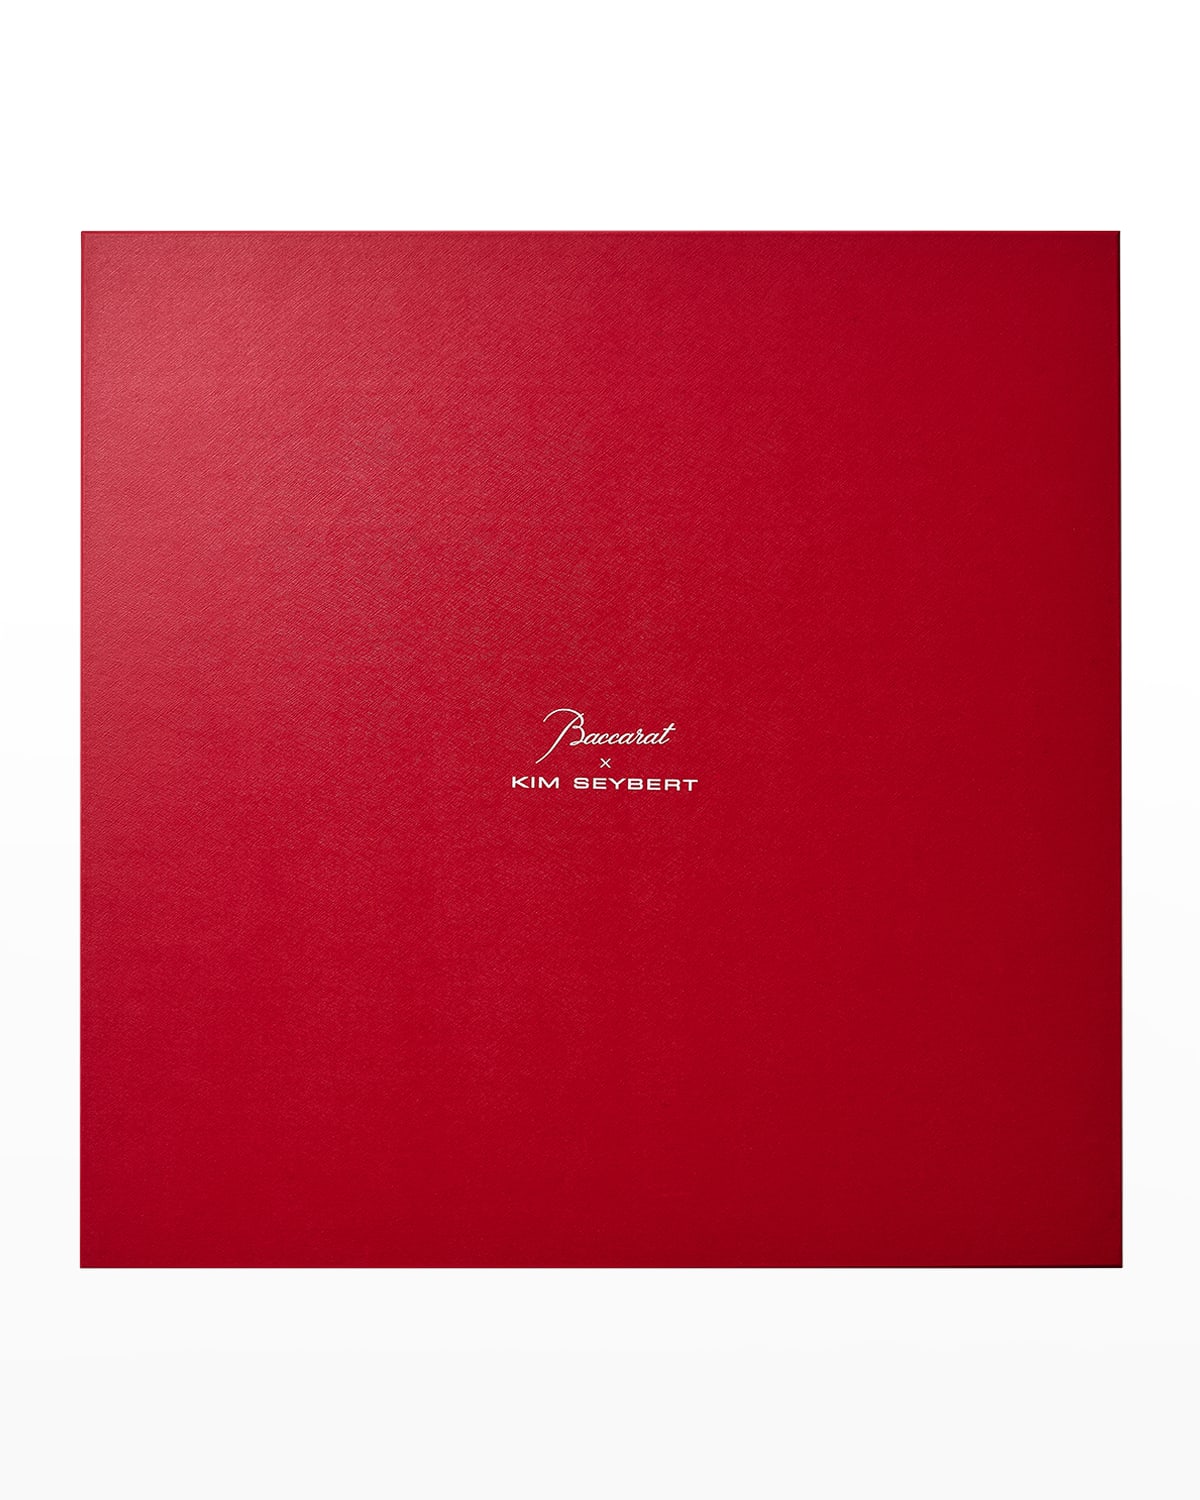 x Baccarat Placemat Box, Yours with any $400 Purchase of Louxor or Zenith Placemats